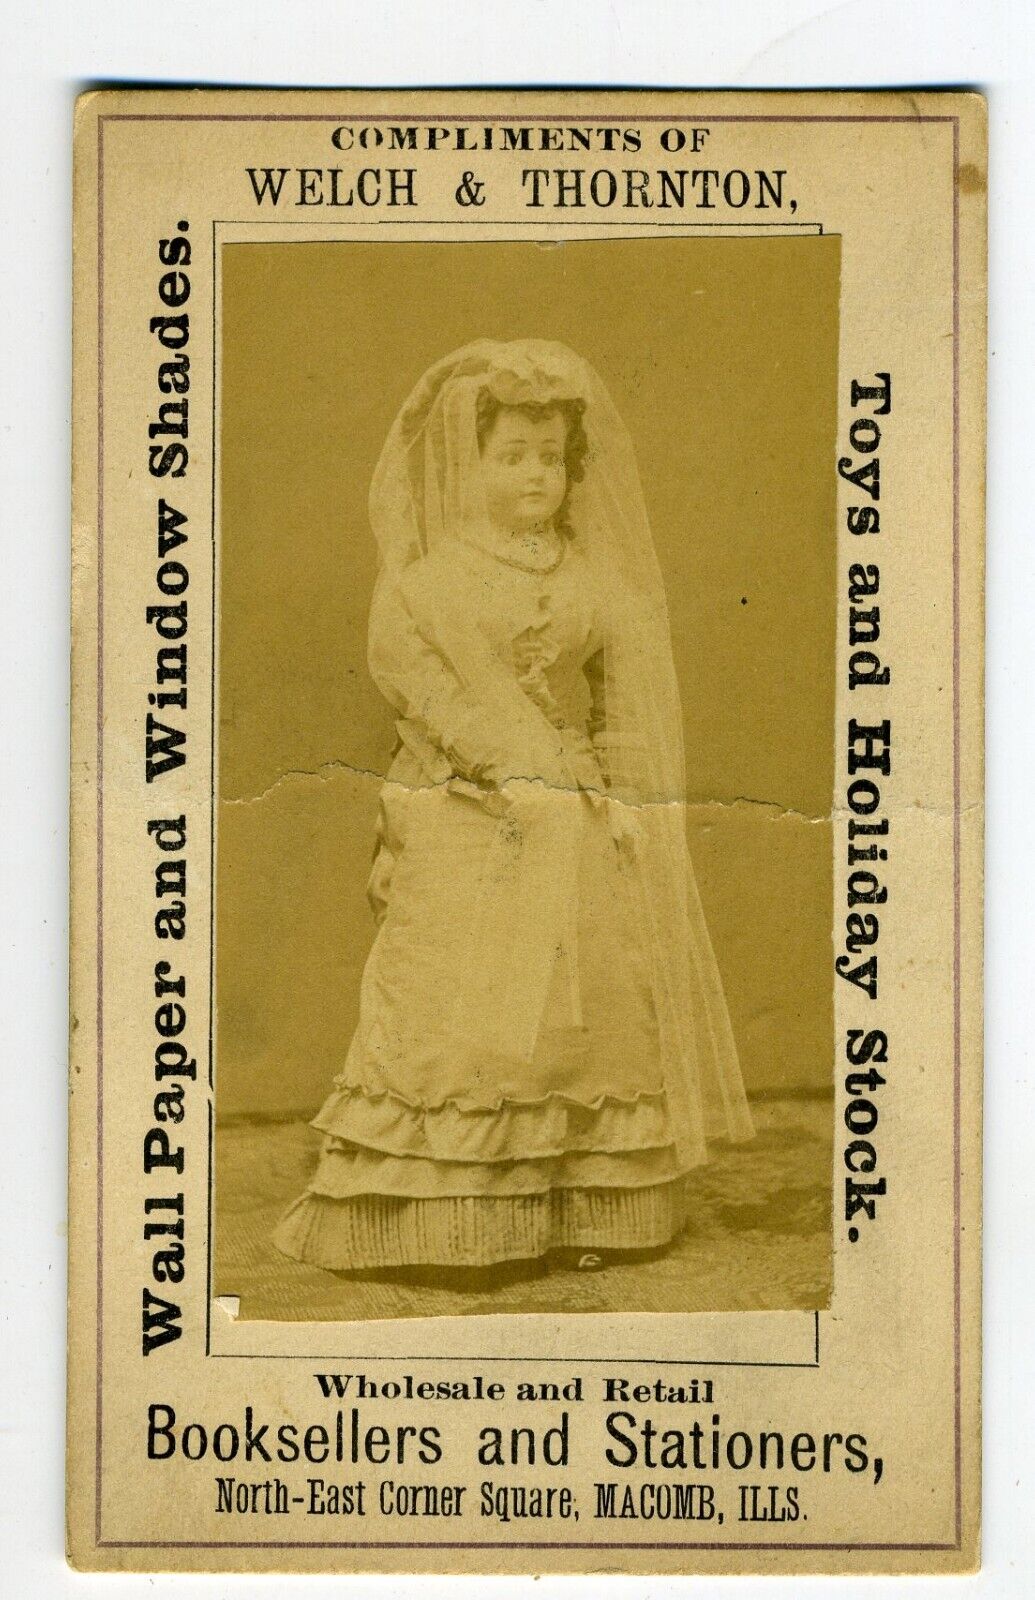 CDV – ADVERTISING  - BOOKSELLERS AND STATIONERS  - LARGE DOLL